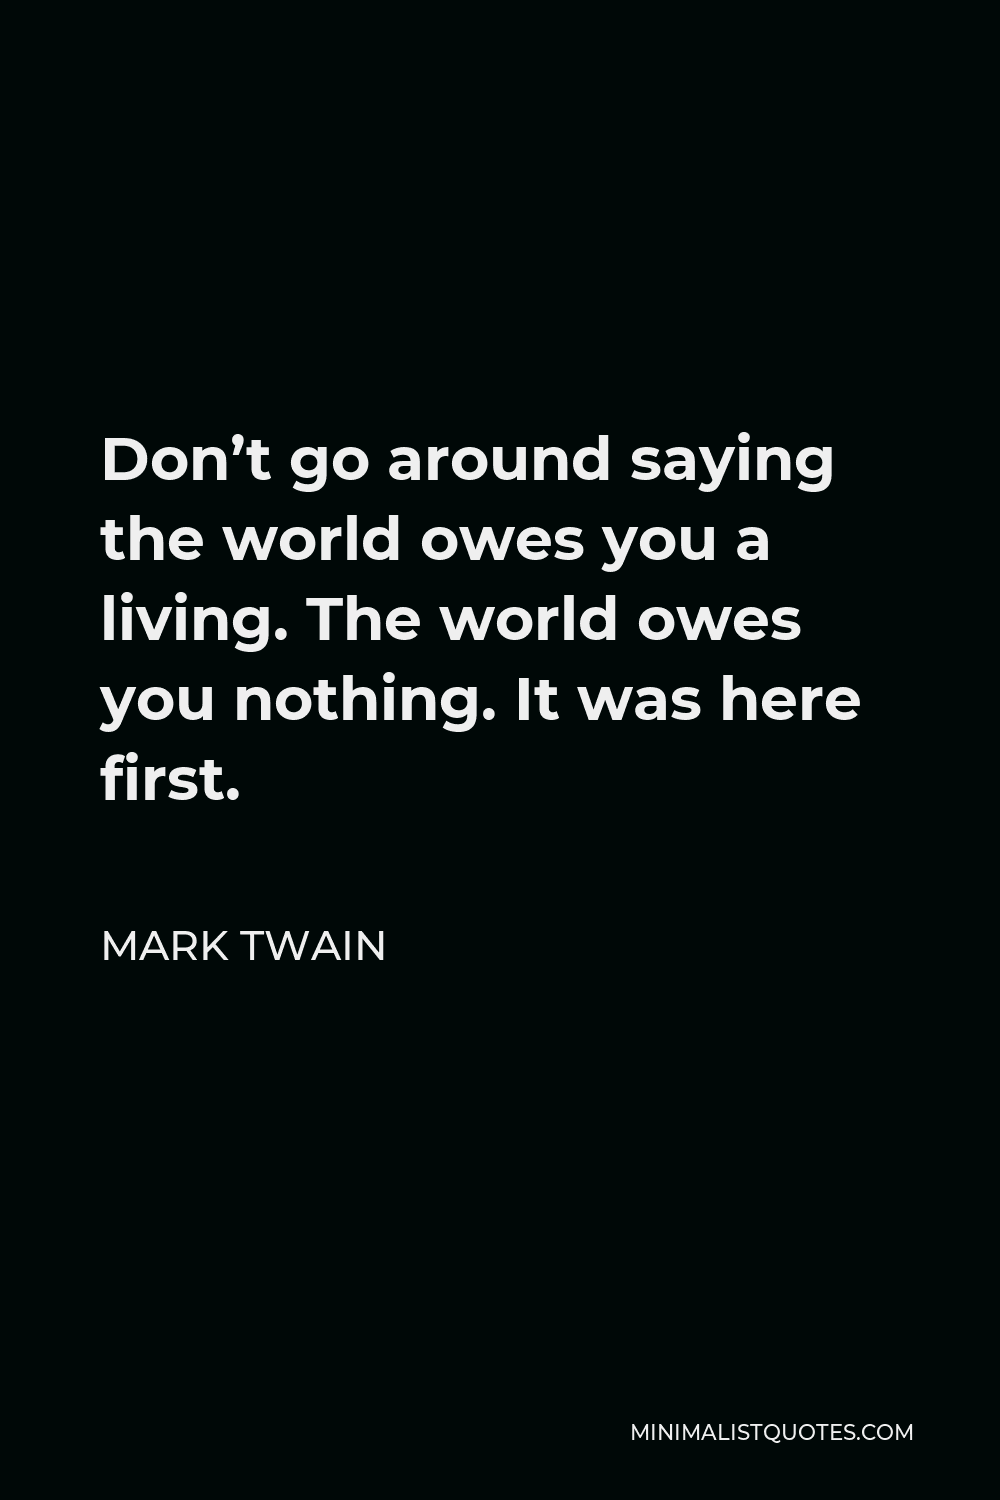 Mark Twain Quote - Don’t go around saying the world owes you a living. The world owes you nothing. It was here first.